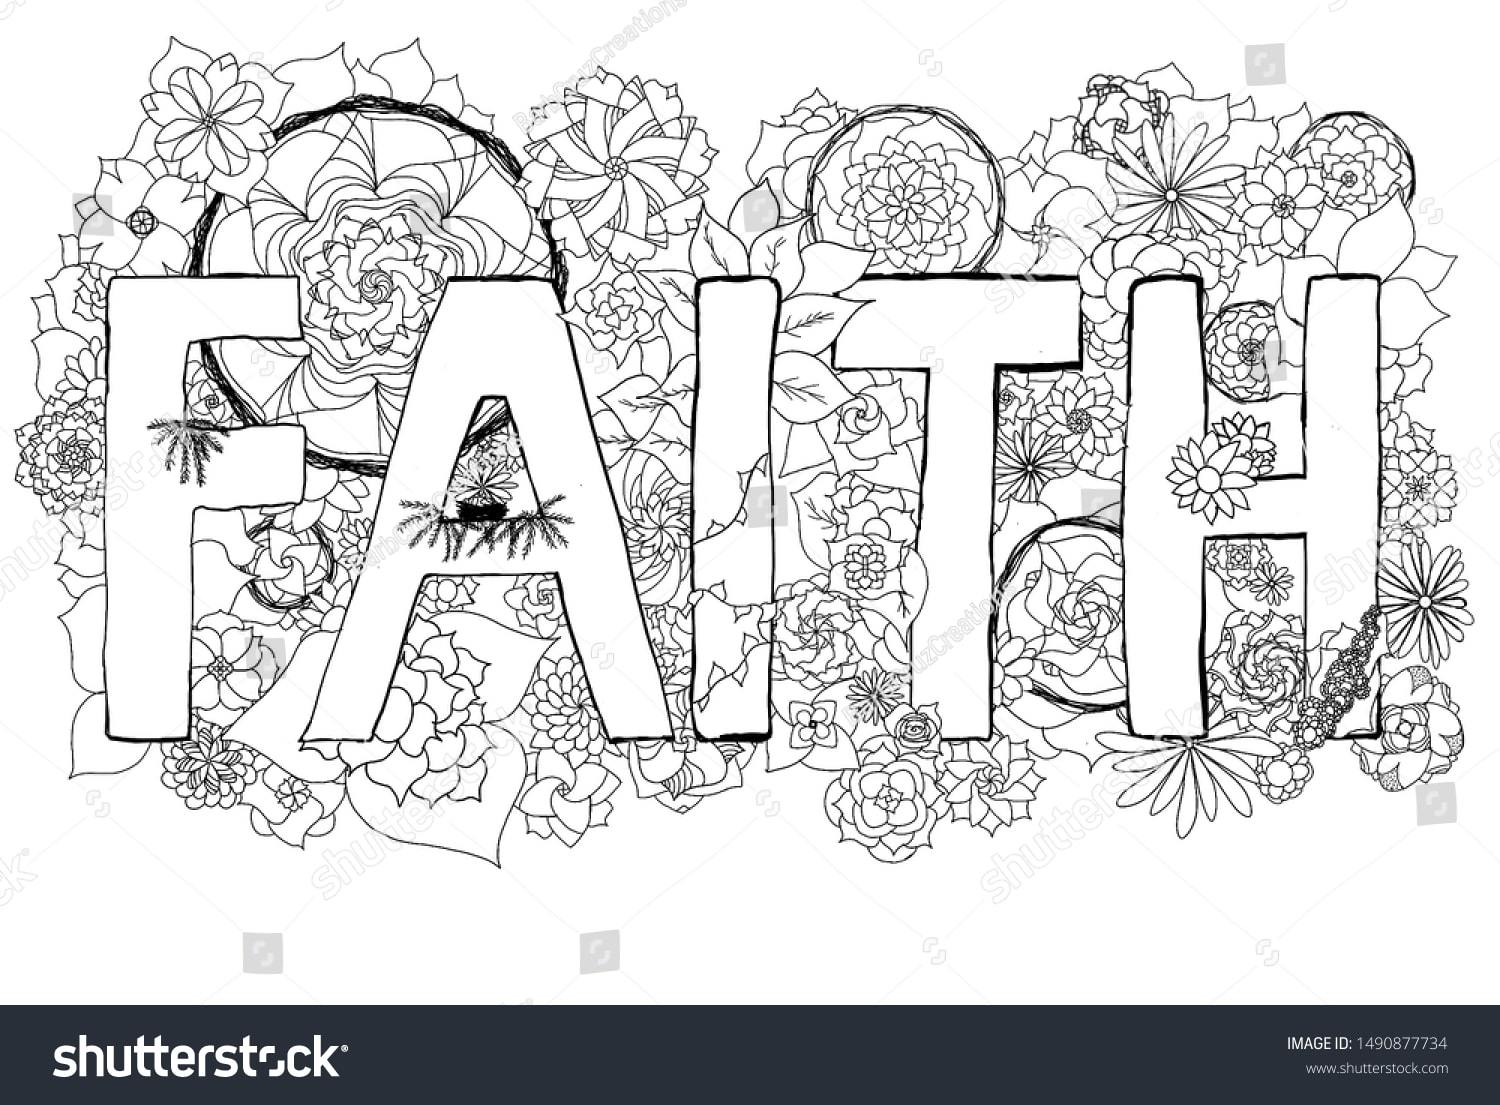 Download Bible Coloring Book Pdf Pin On Coloring Pages All Of The Verses In This Set Center Around Faith And They Can Be Paired Nicely As A Supplemental Activity For Studying